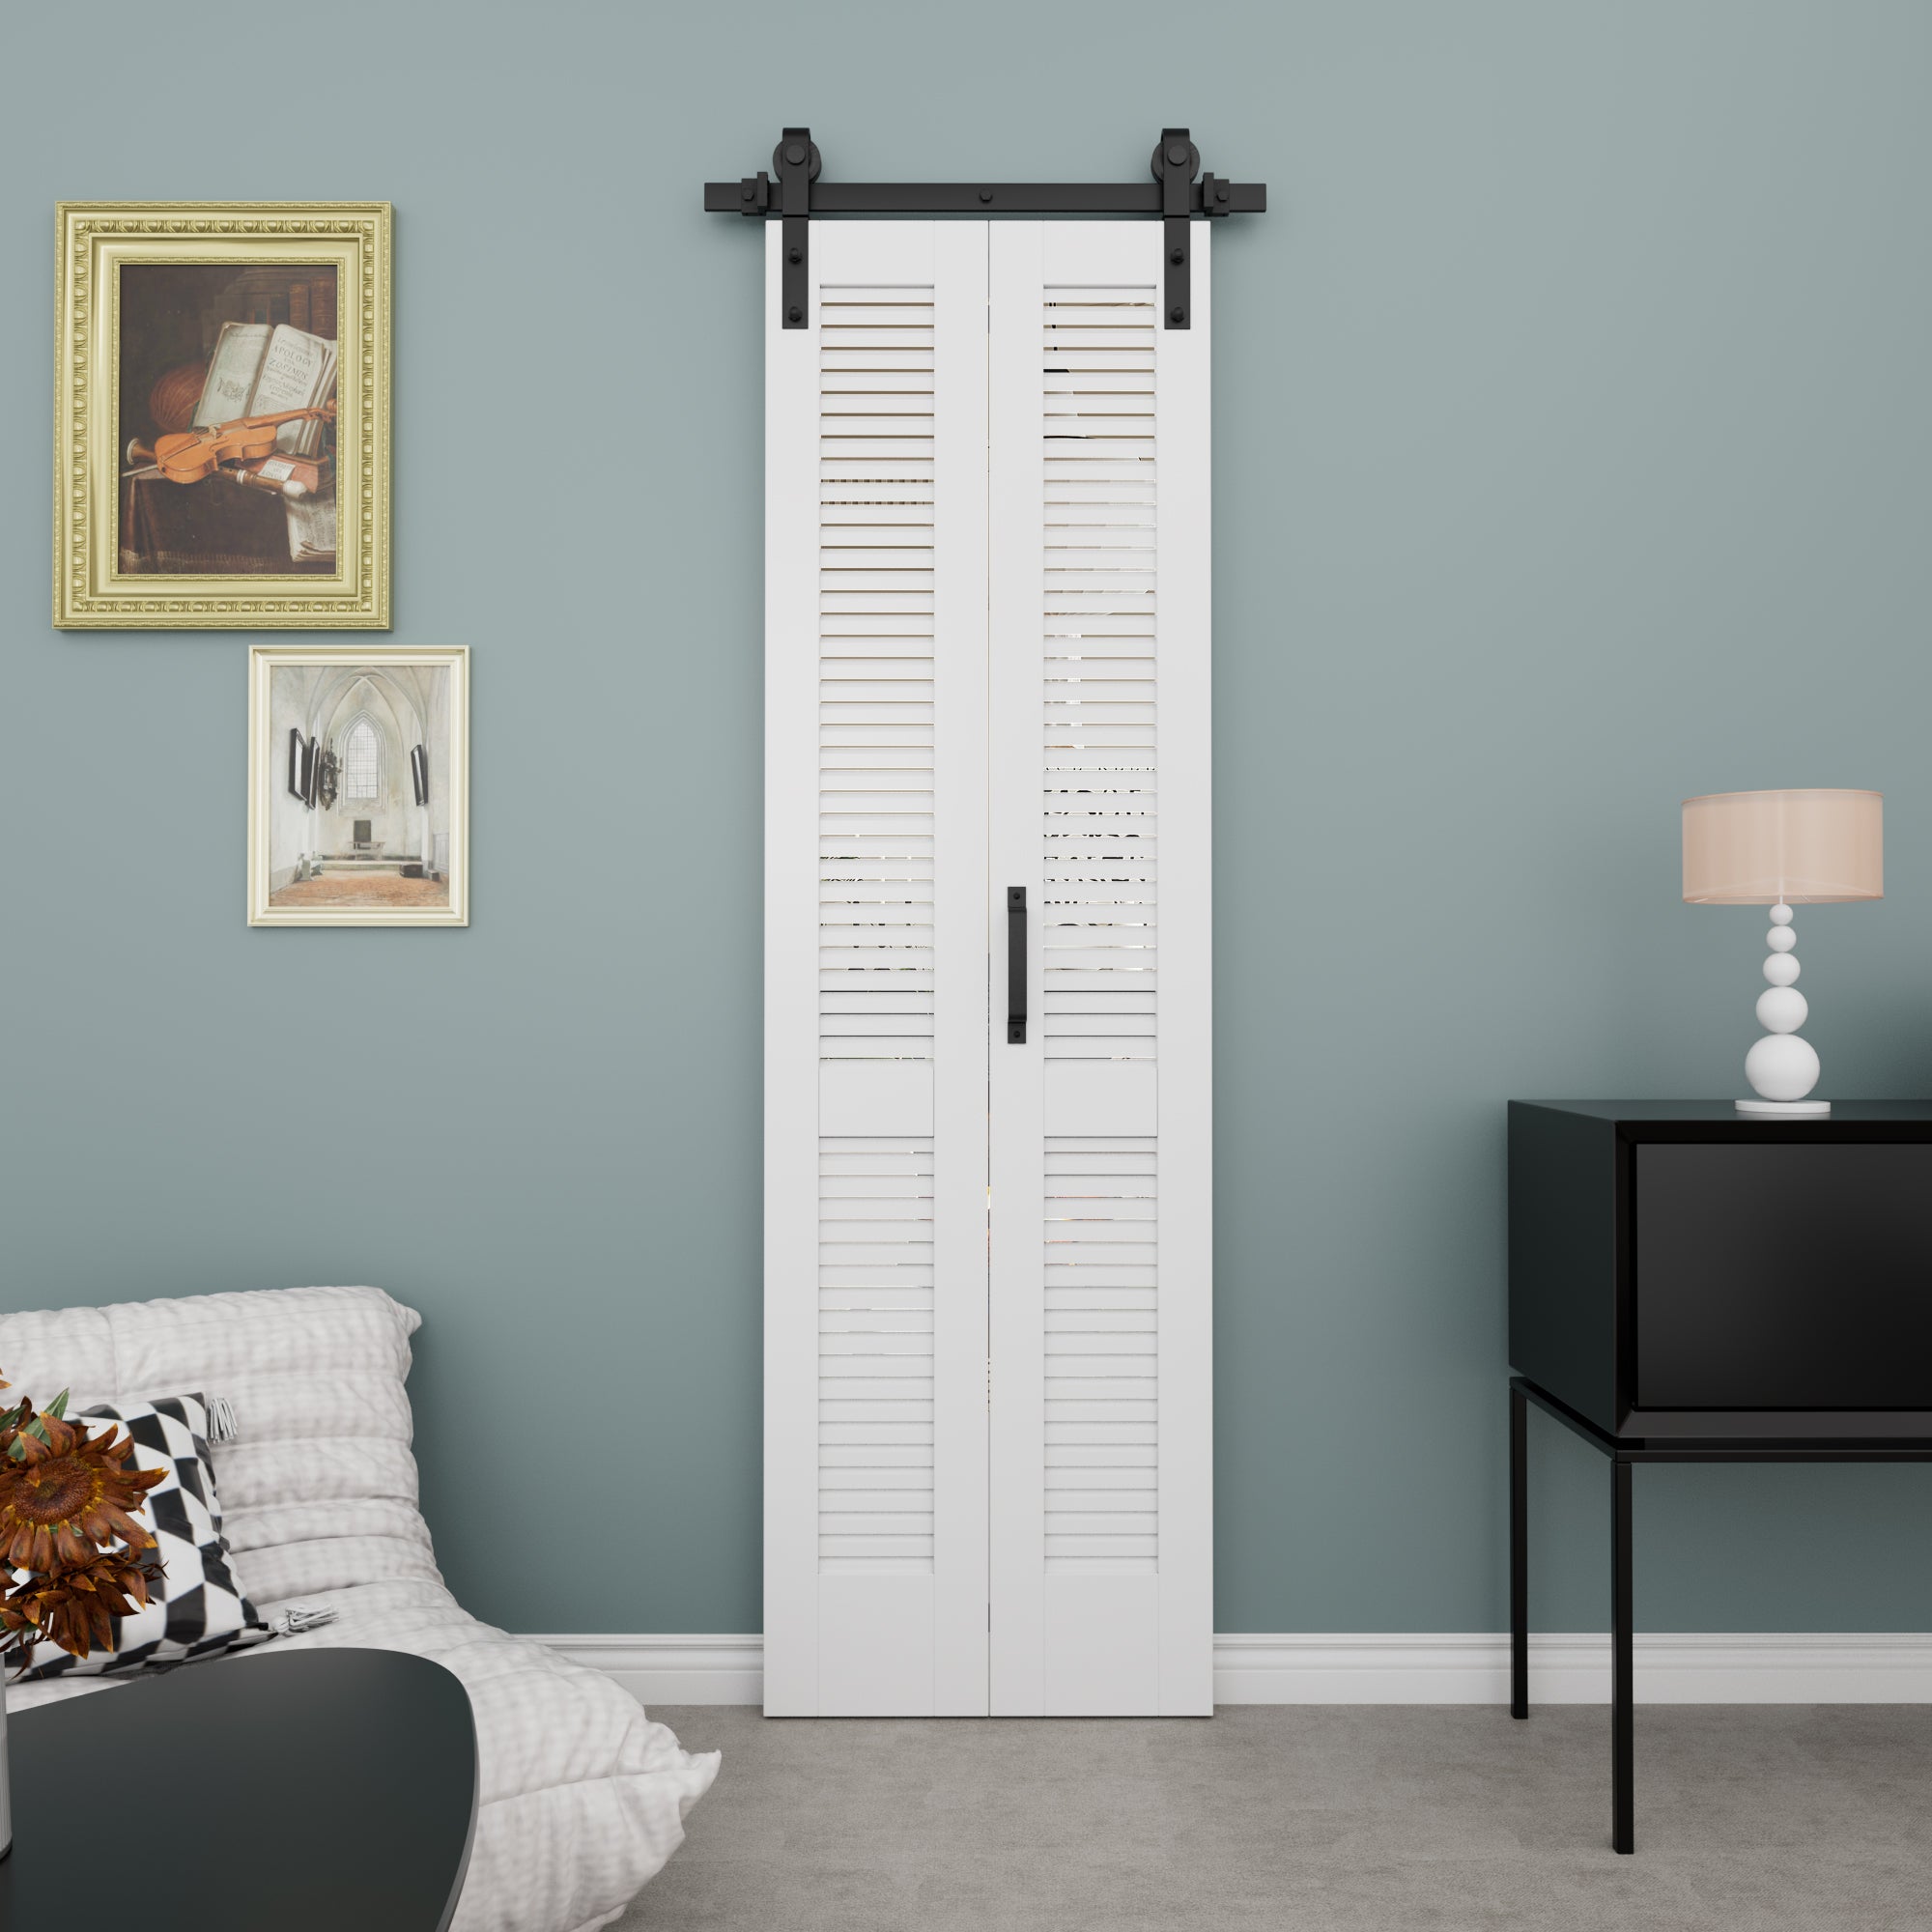 Ark Design Louvered Closet Bifold Barn Door with Hardware Kit & Handle, Solid Core MDF Wood & PVC Covered, Finished, White